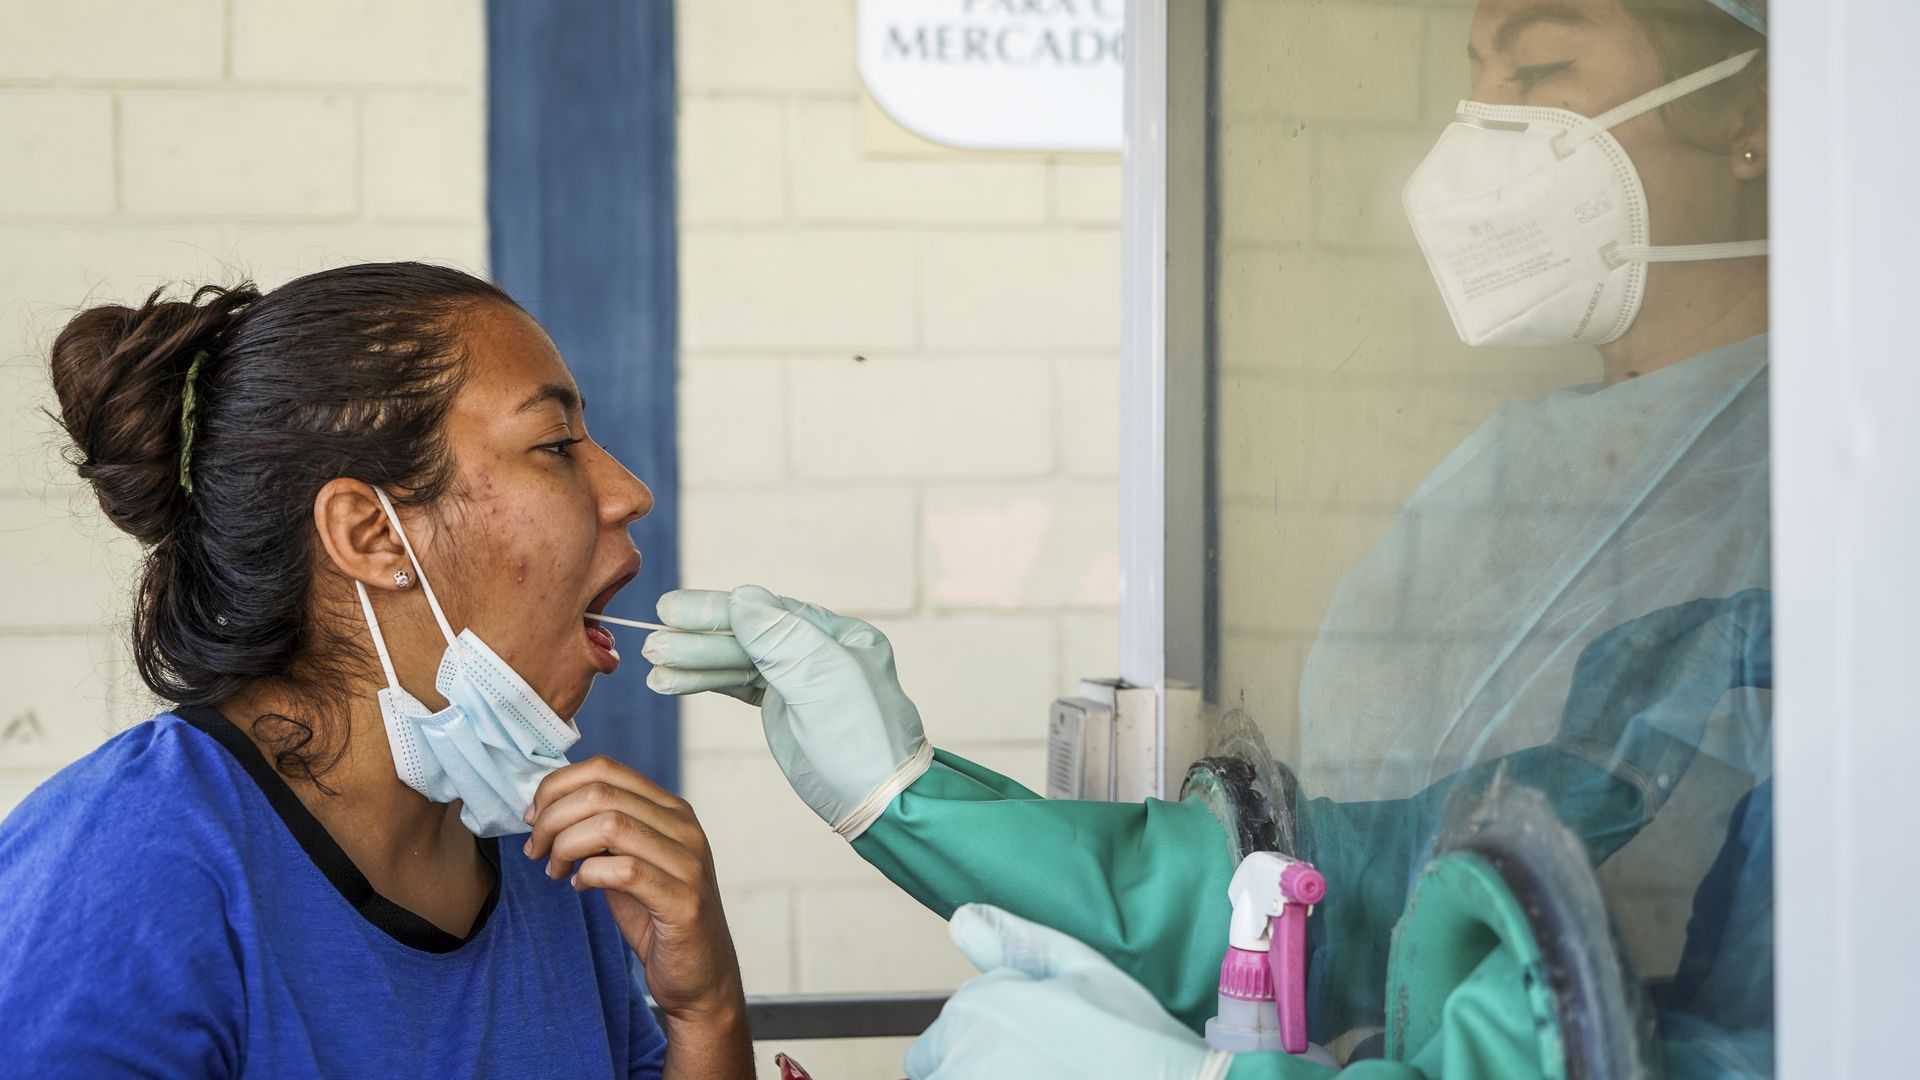 A health worker taking a swab sample from a patient at a COVID-19 testing site in San Salvador, El Salvador.